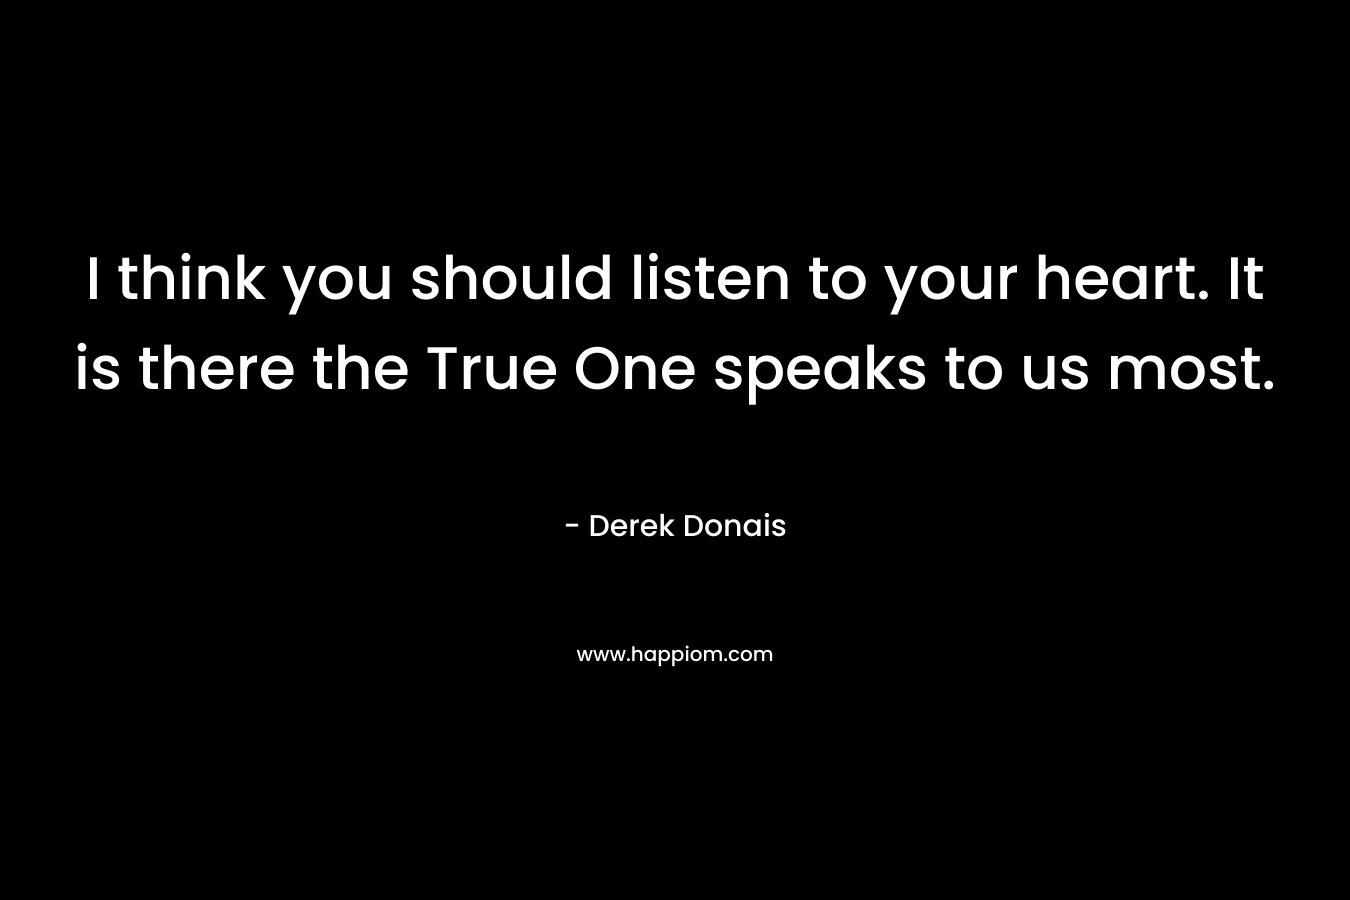 I think you should listen to your heart. It is there the True One speaks to us most.